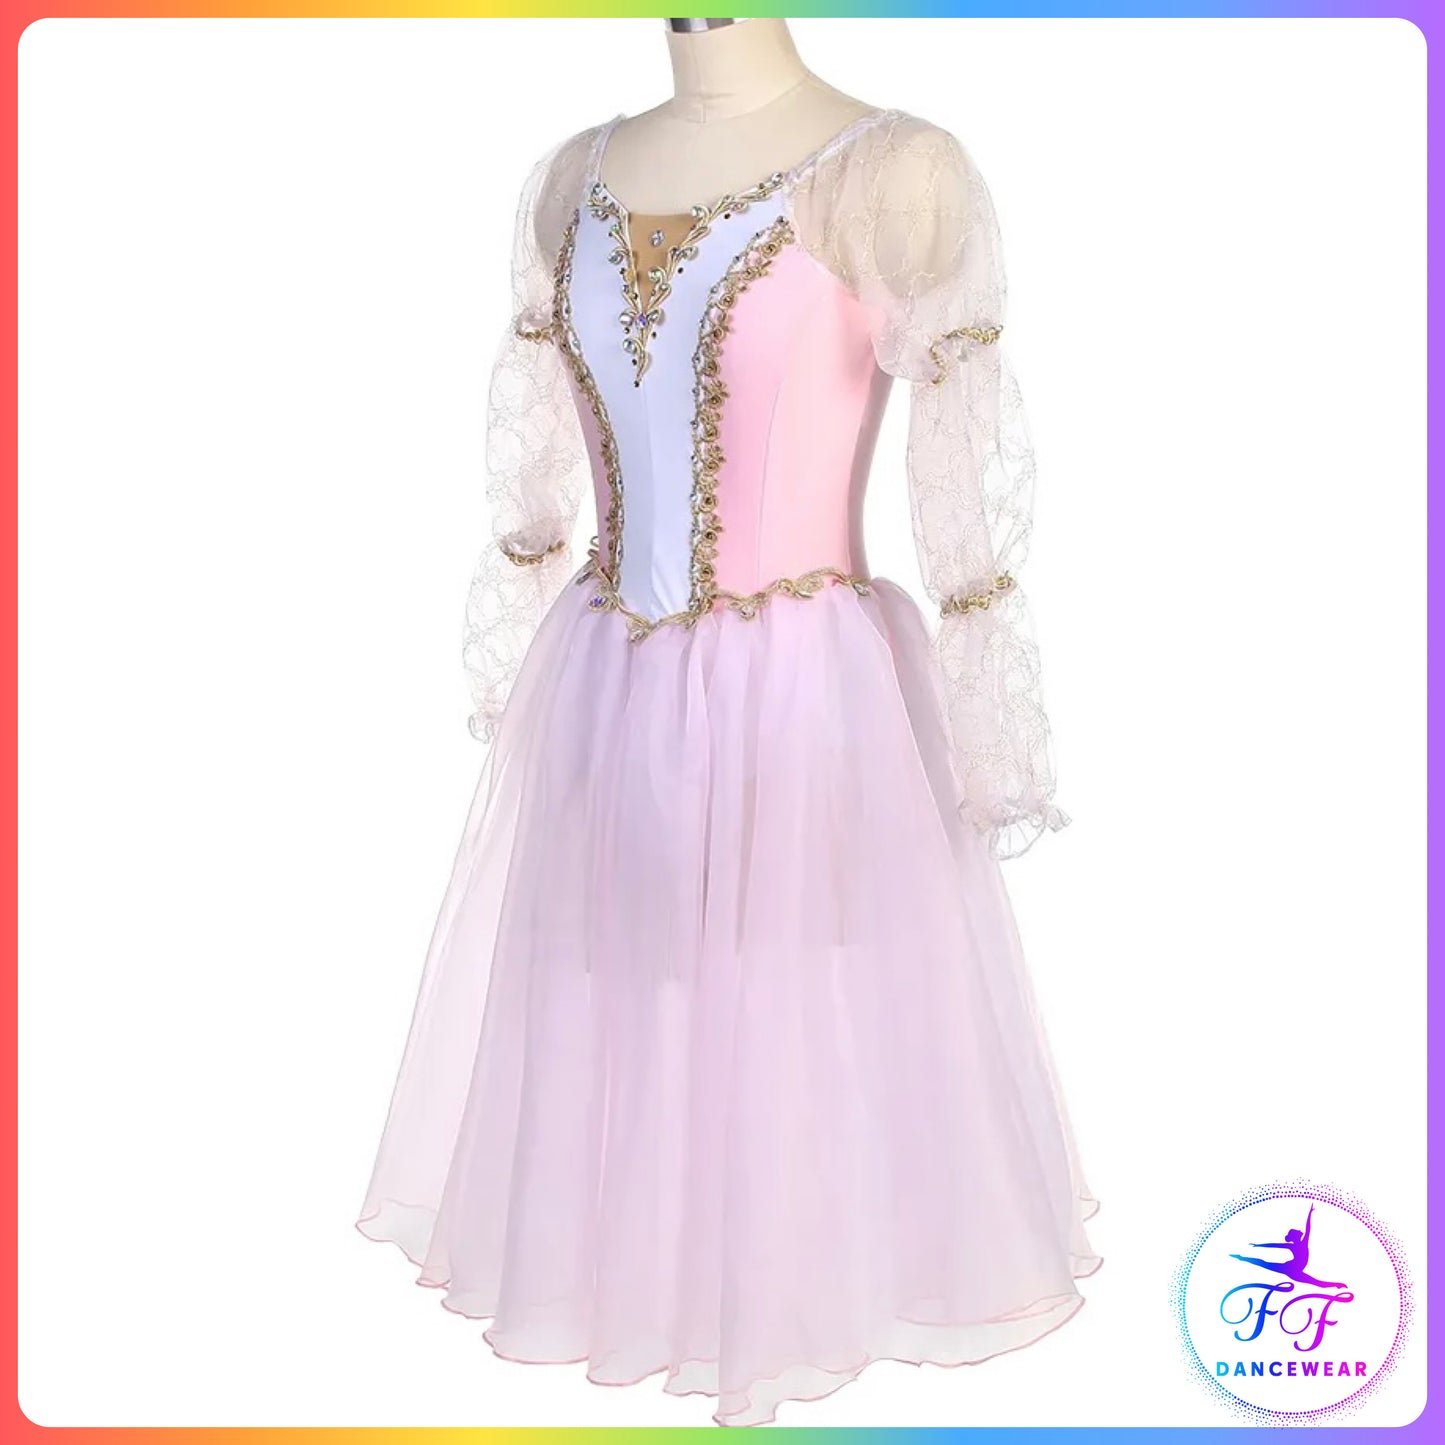 Long Sleeve Romantic Tutu in Blue or Pink (Child & Adult Sizes)